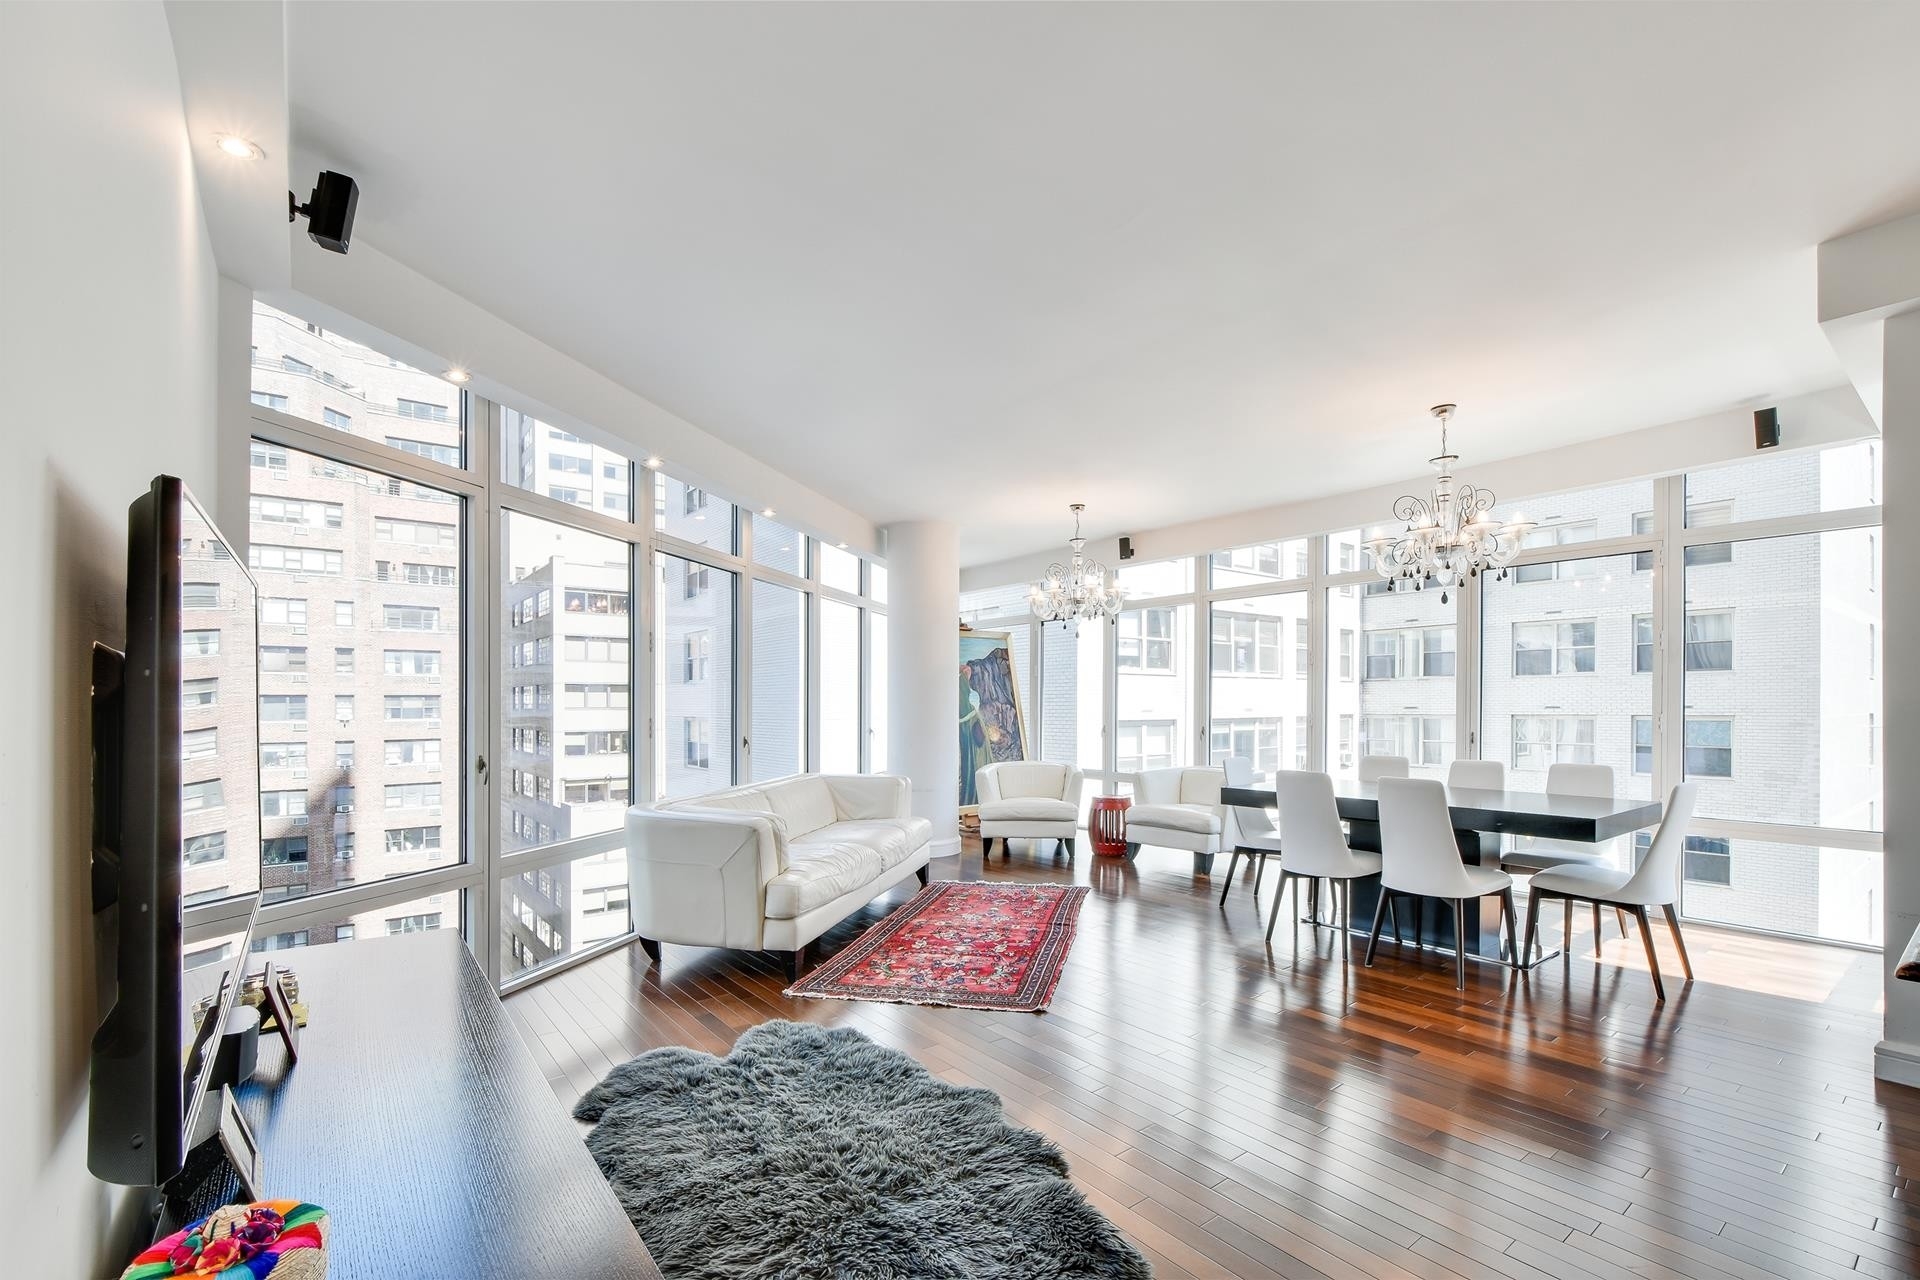 Condominium for Sale at Place 57, 207 E 57TH ST, 11A Midtown East, New York, New York 10022